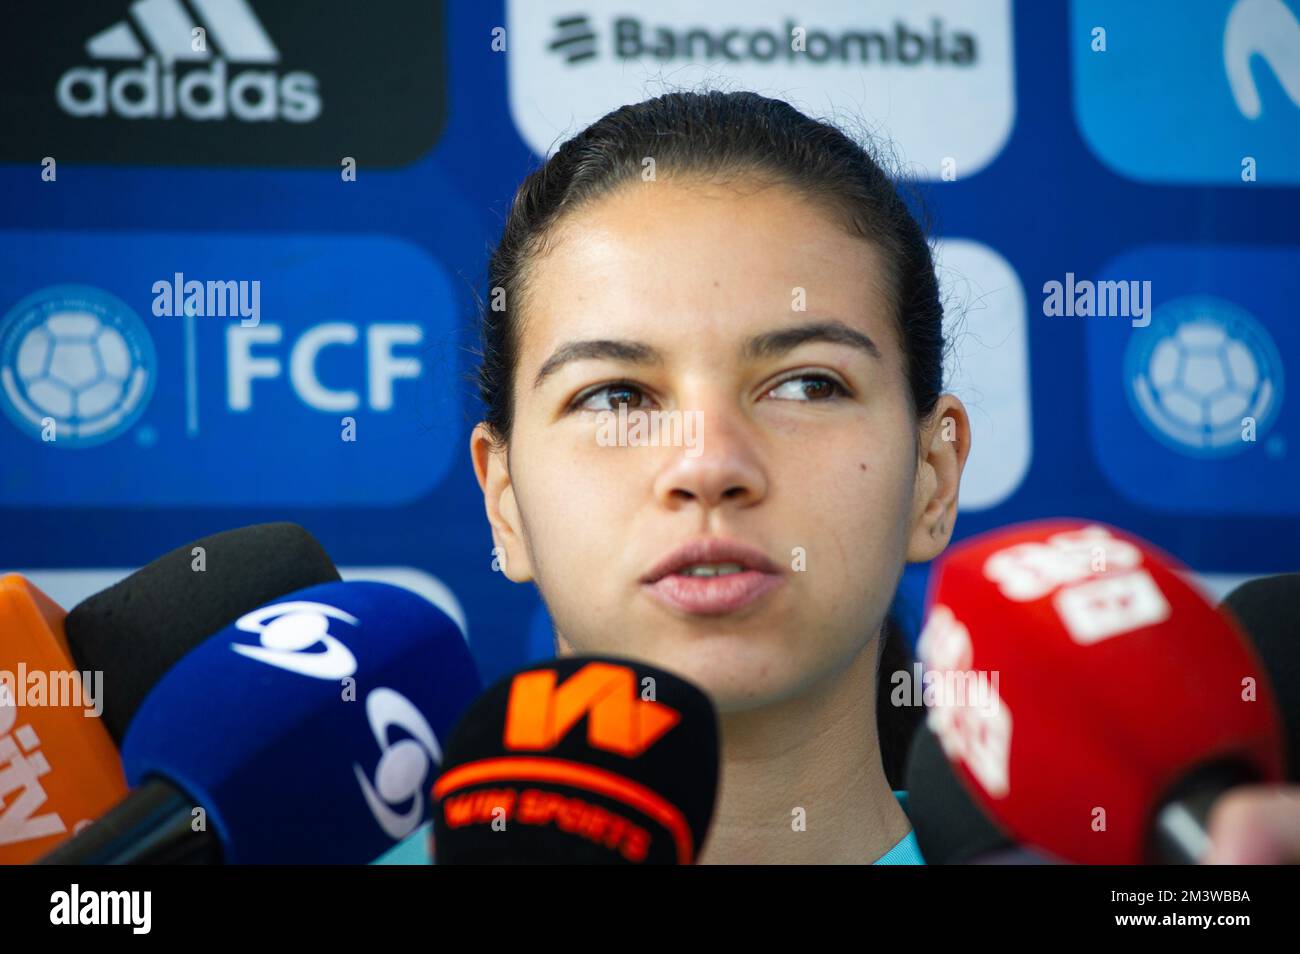 Iliana Izquierdo gives a press conference during Colombia's womens team preparations in Bogota, Colombia for the 2023 Australia's Womens World Cup, december 15, 2022. Photo by: S. Barros/Long Visual Press Stock Photo